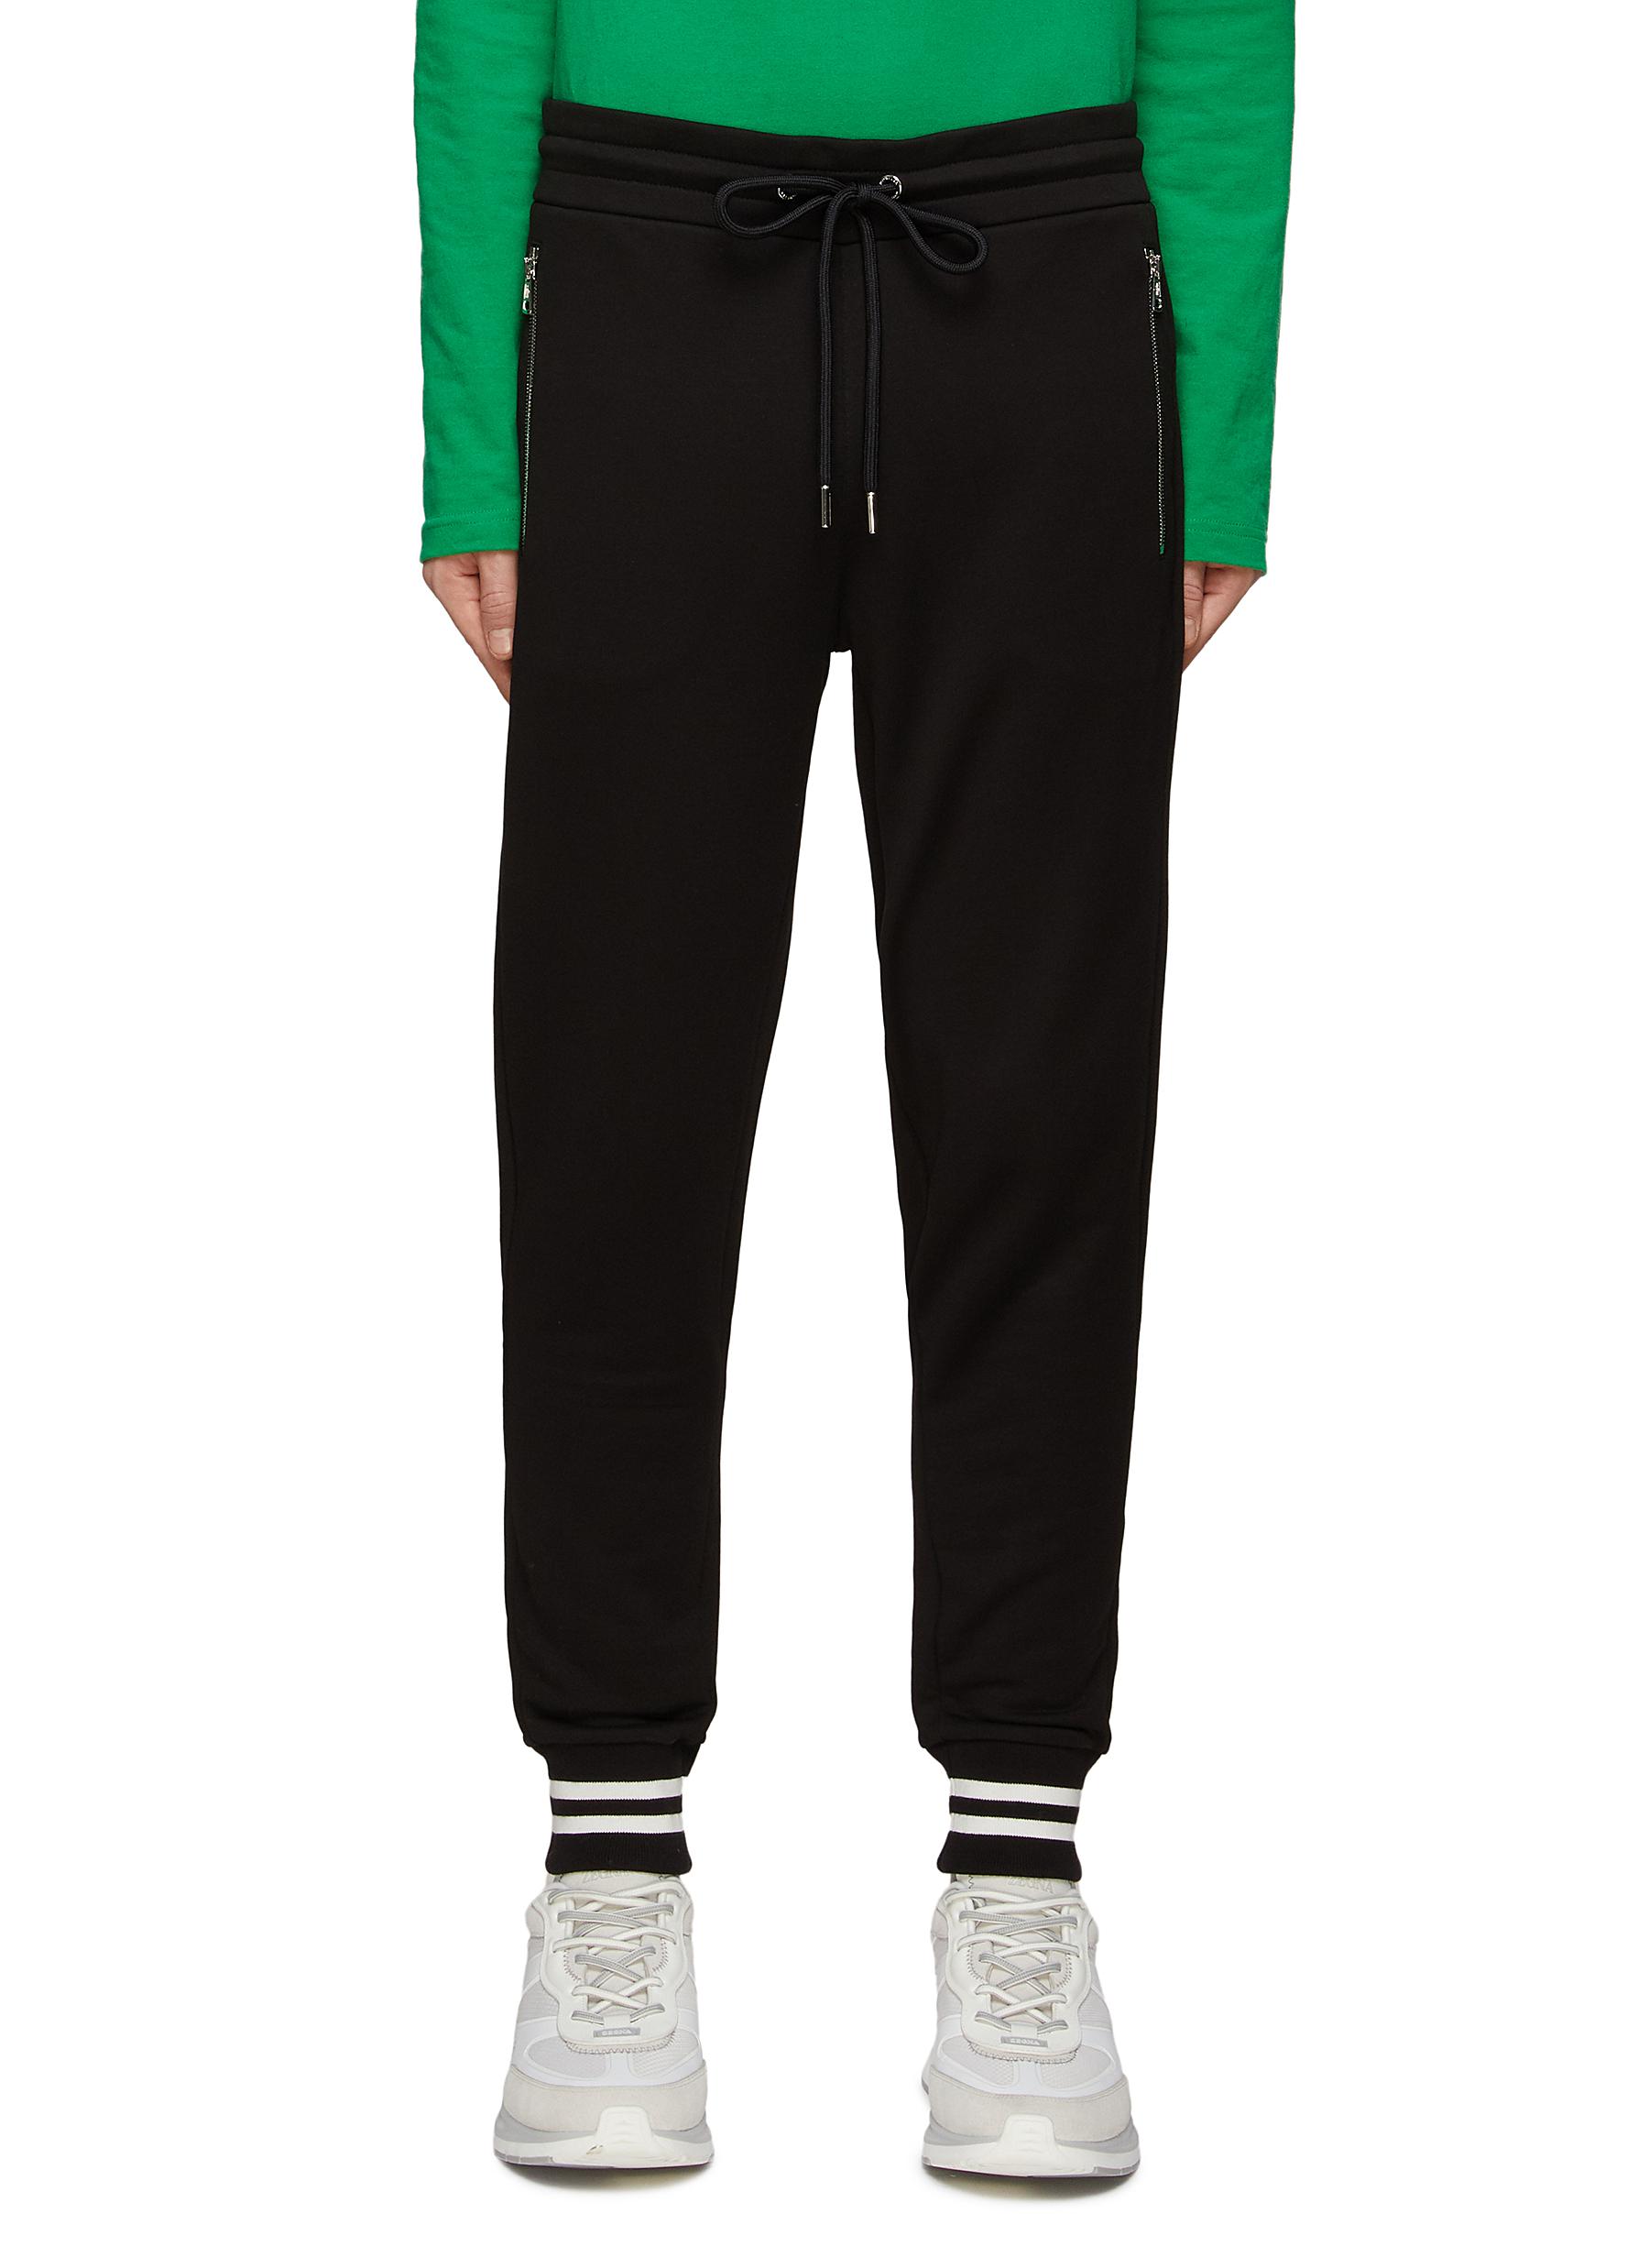 MONCLER COTTON FLEECE WITH CONTRASTING COLORED STRIPES SWEATPANTS